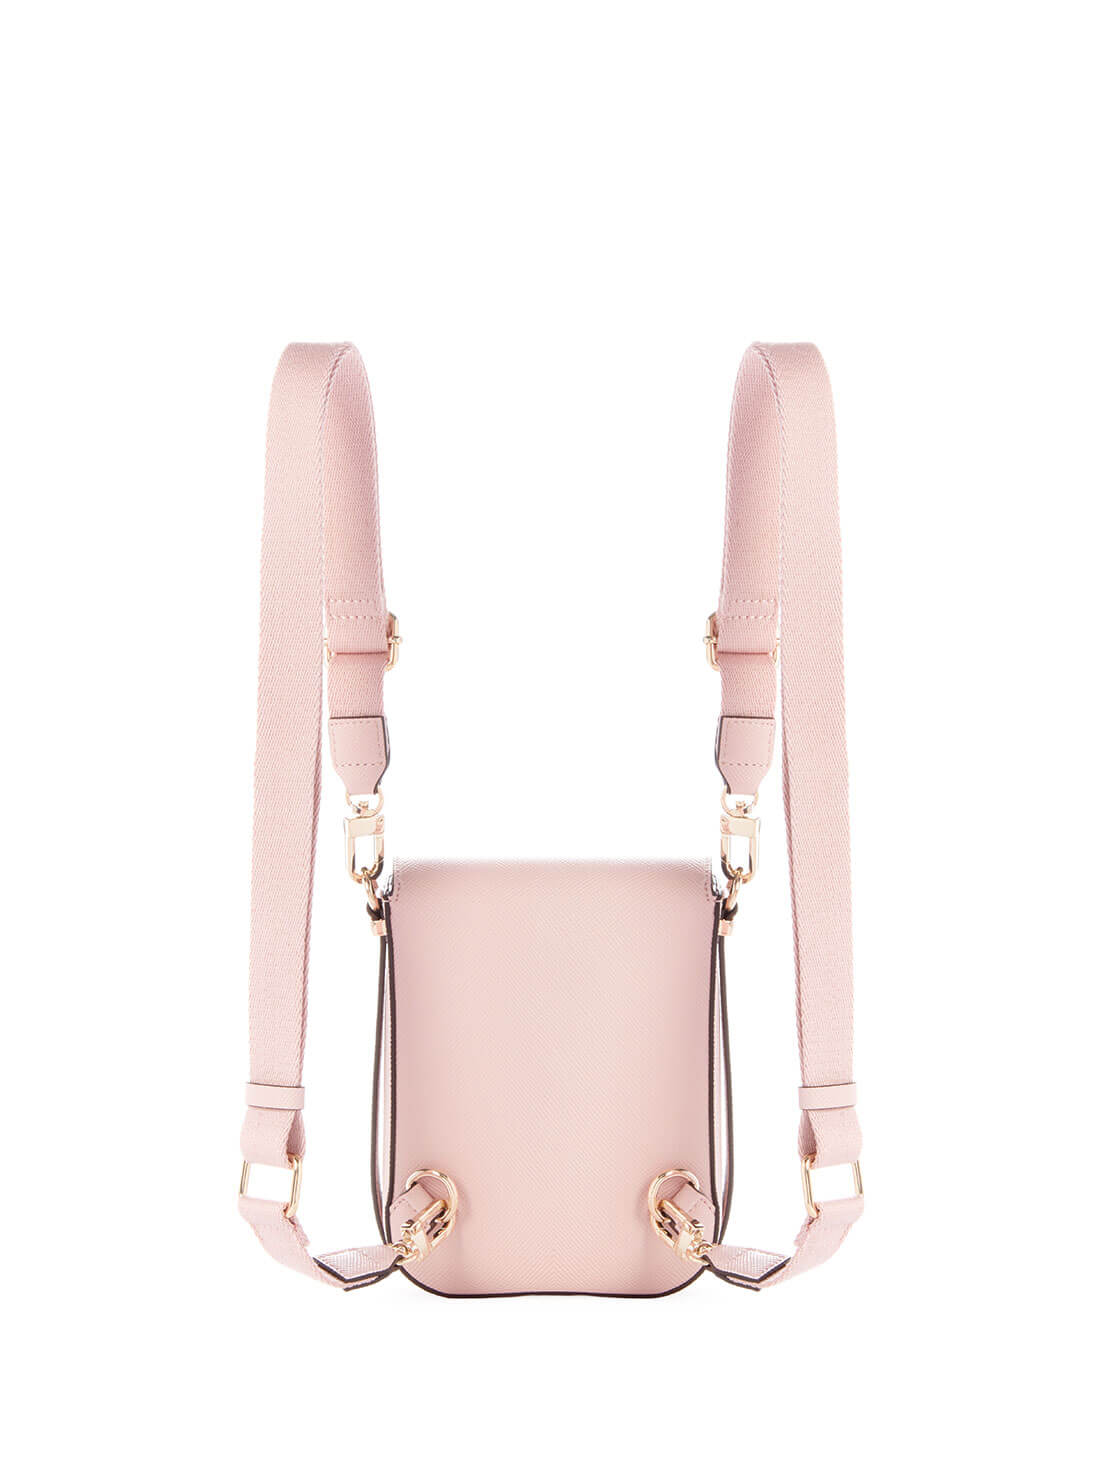 Women's Blush Pink Brynlee Mini Convertible Backpack back view